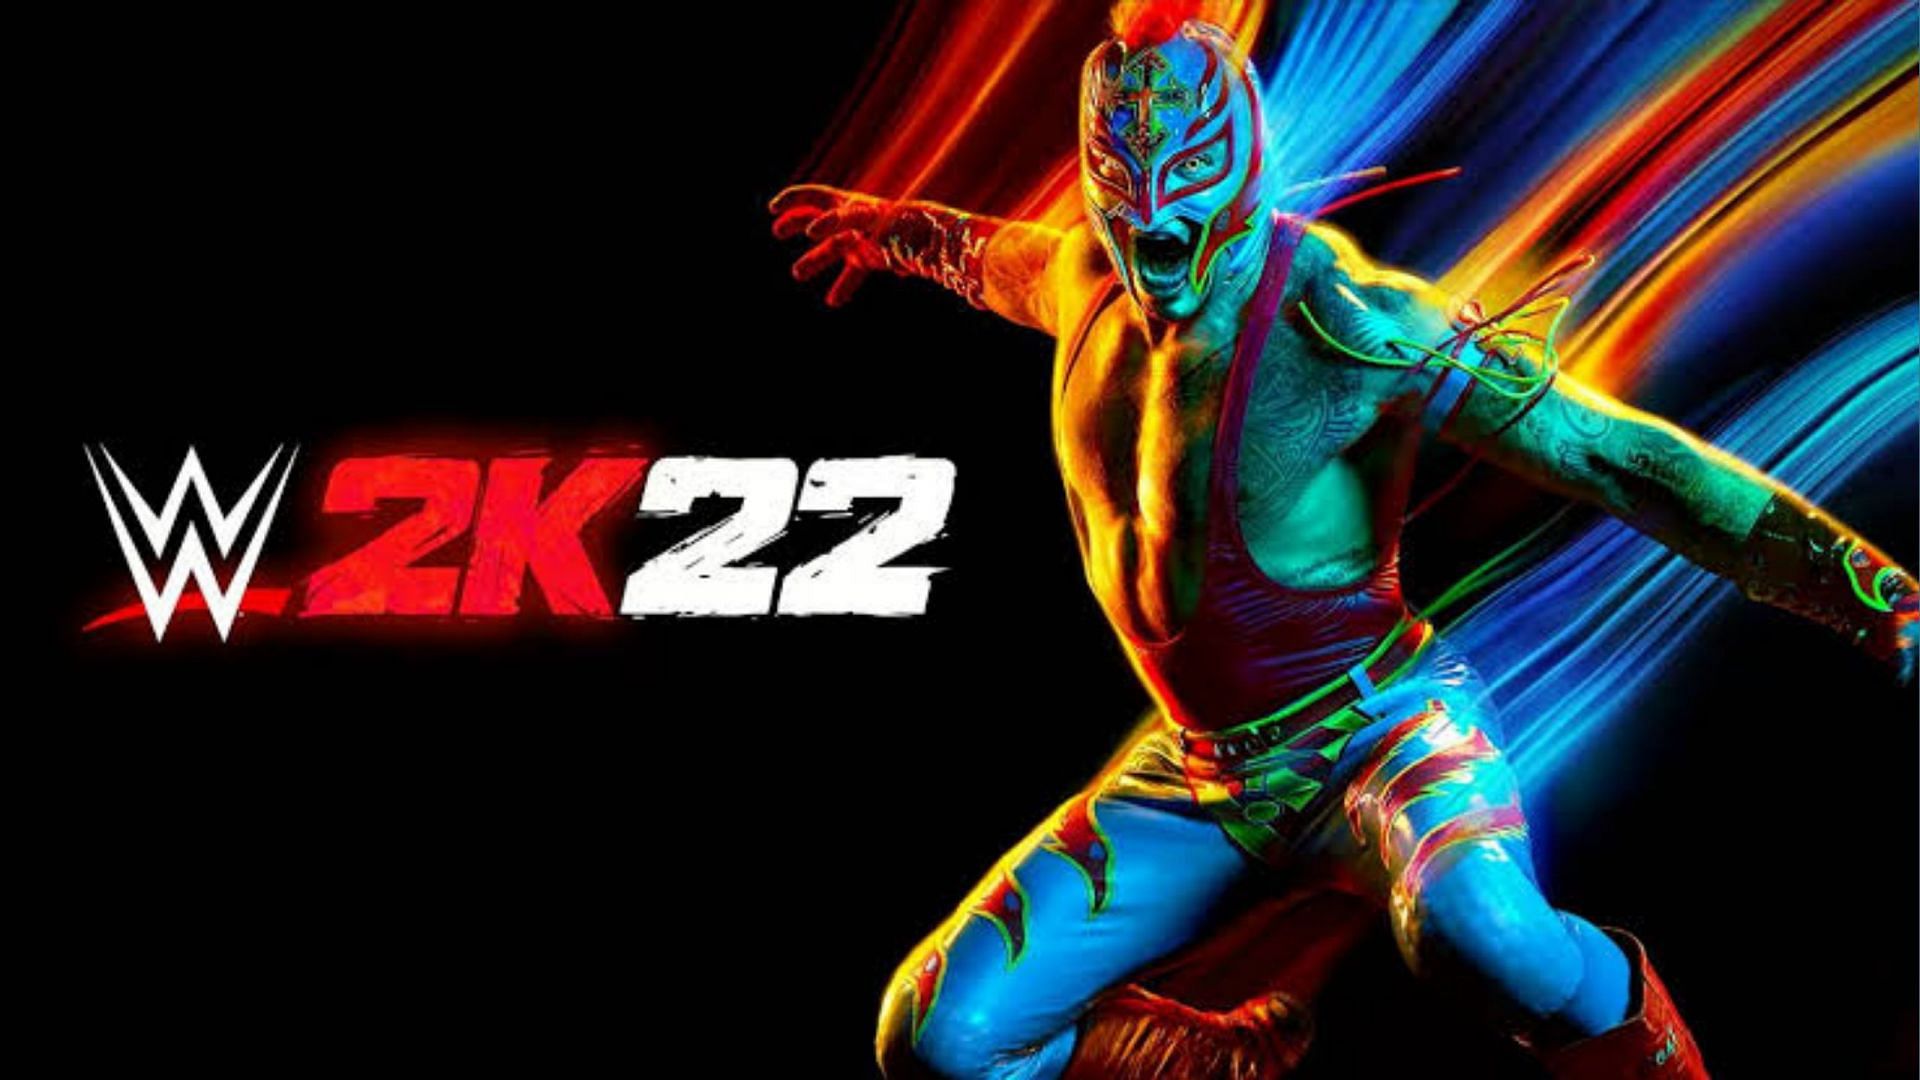 How to download ppsspp WWE 2k22 game｜TikTok Search